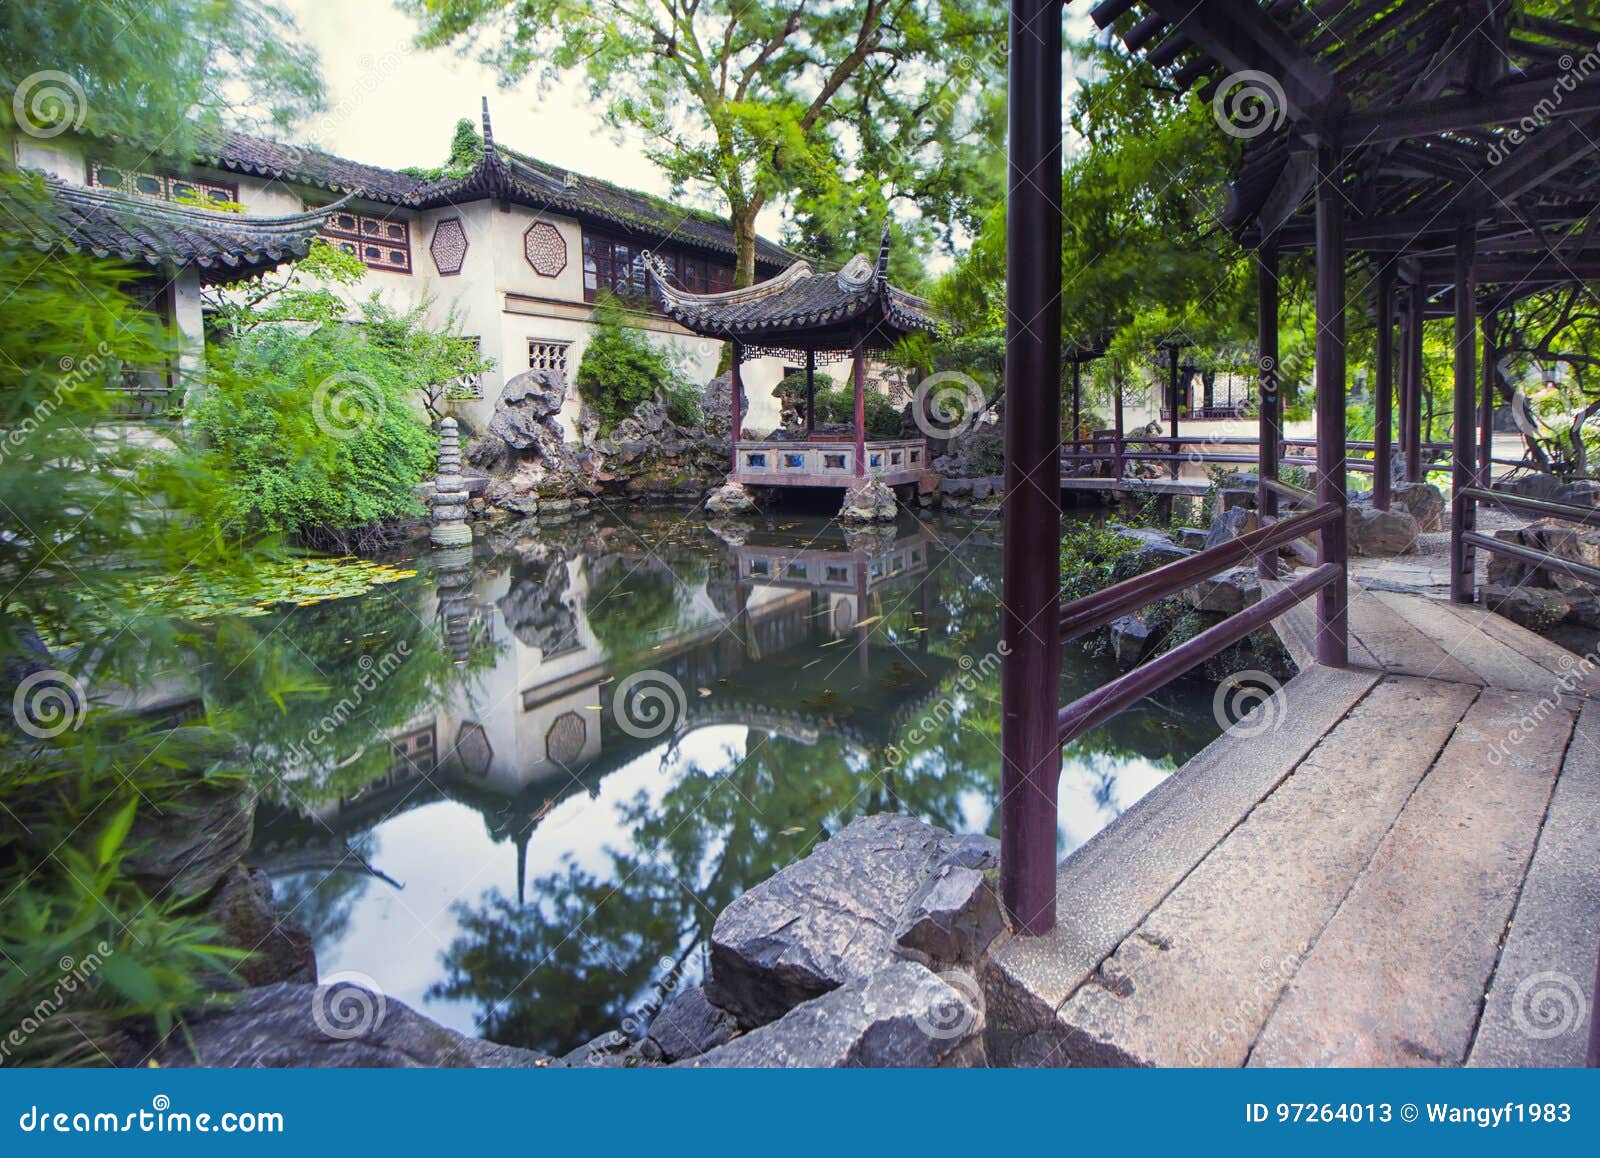 Lingering Garden Suzhou Crown Yunfeng Stock Image - Image of grounds ...